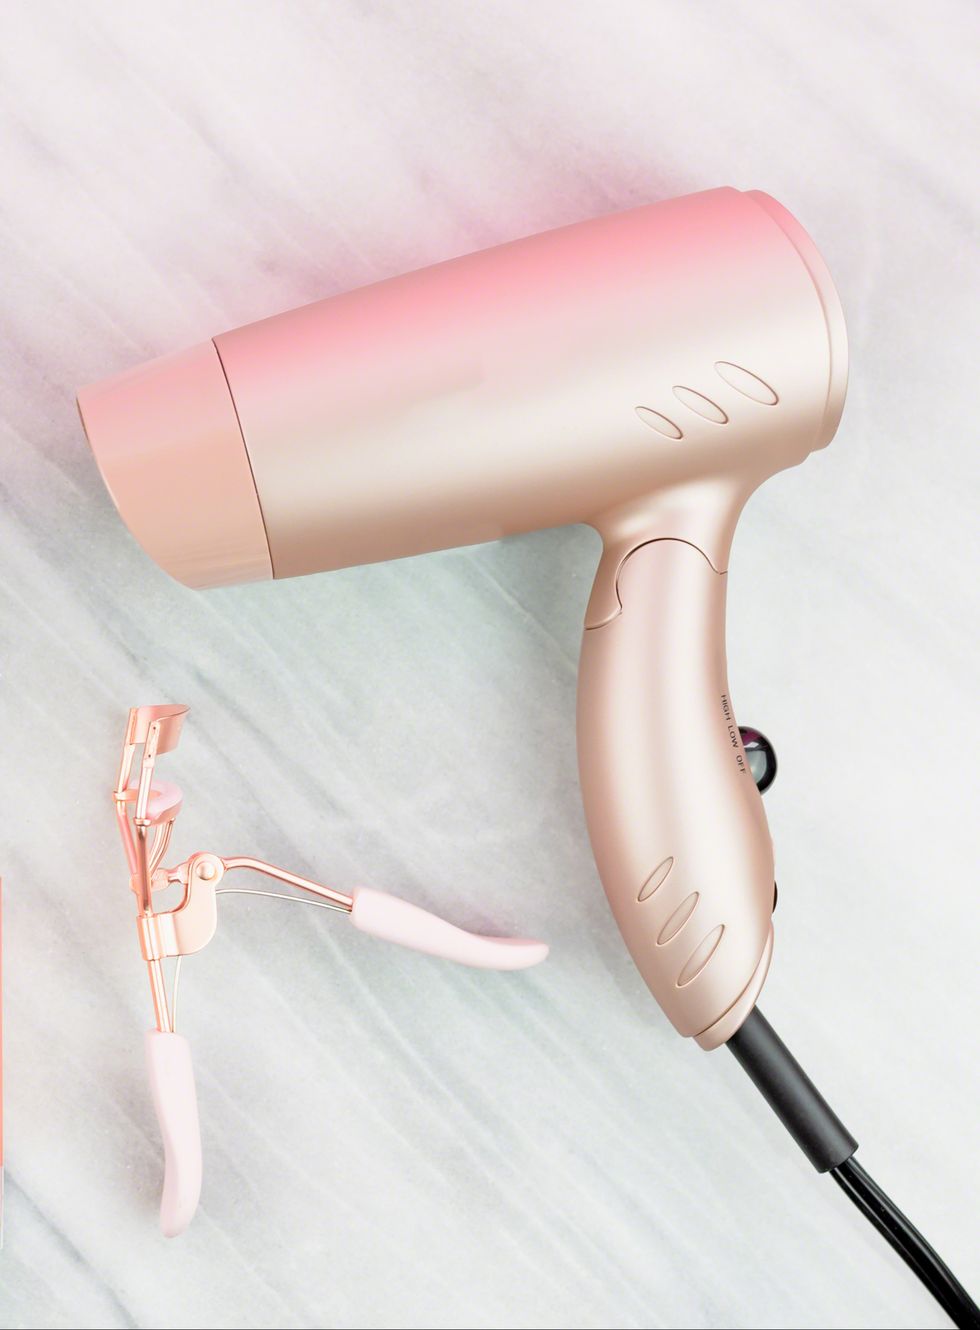 Women’s styling tools and cosmetics in rose gold